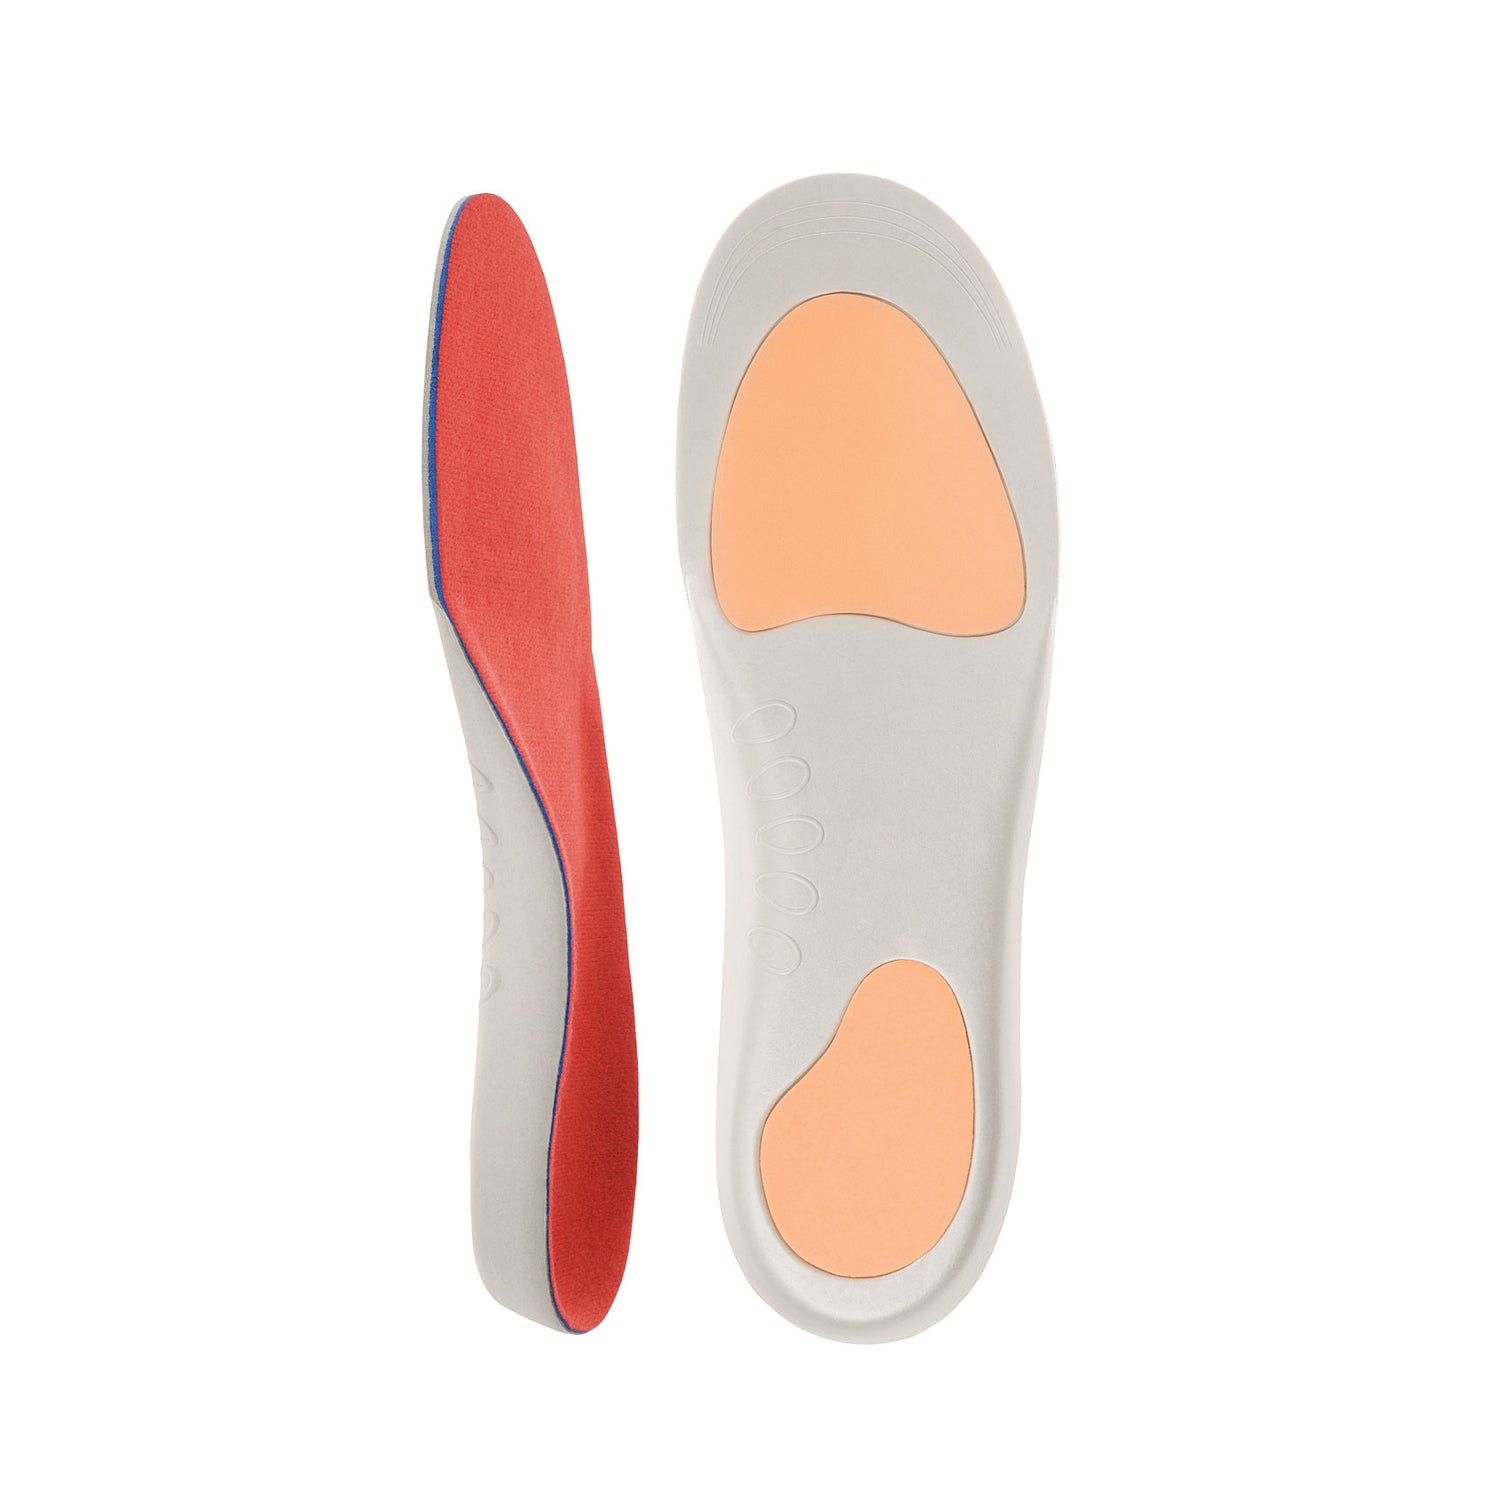 DJMed Orthotic - Shoe Insoles - Mens 11.5-13